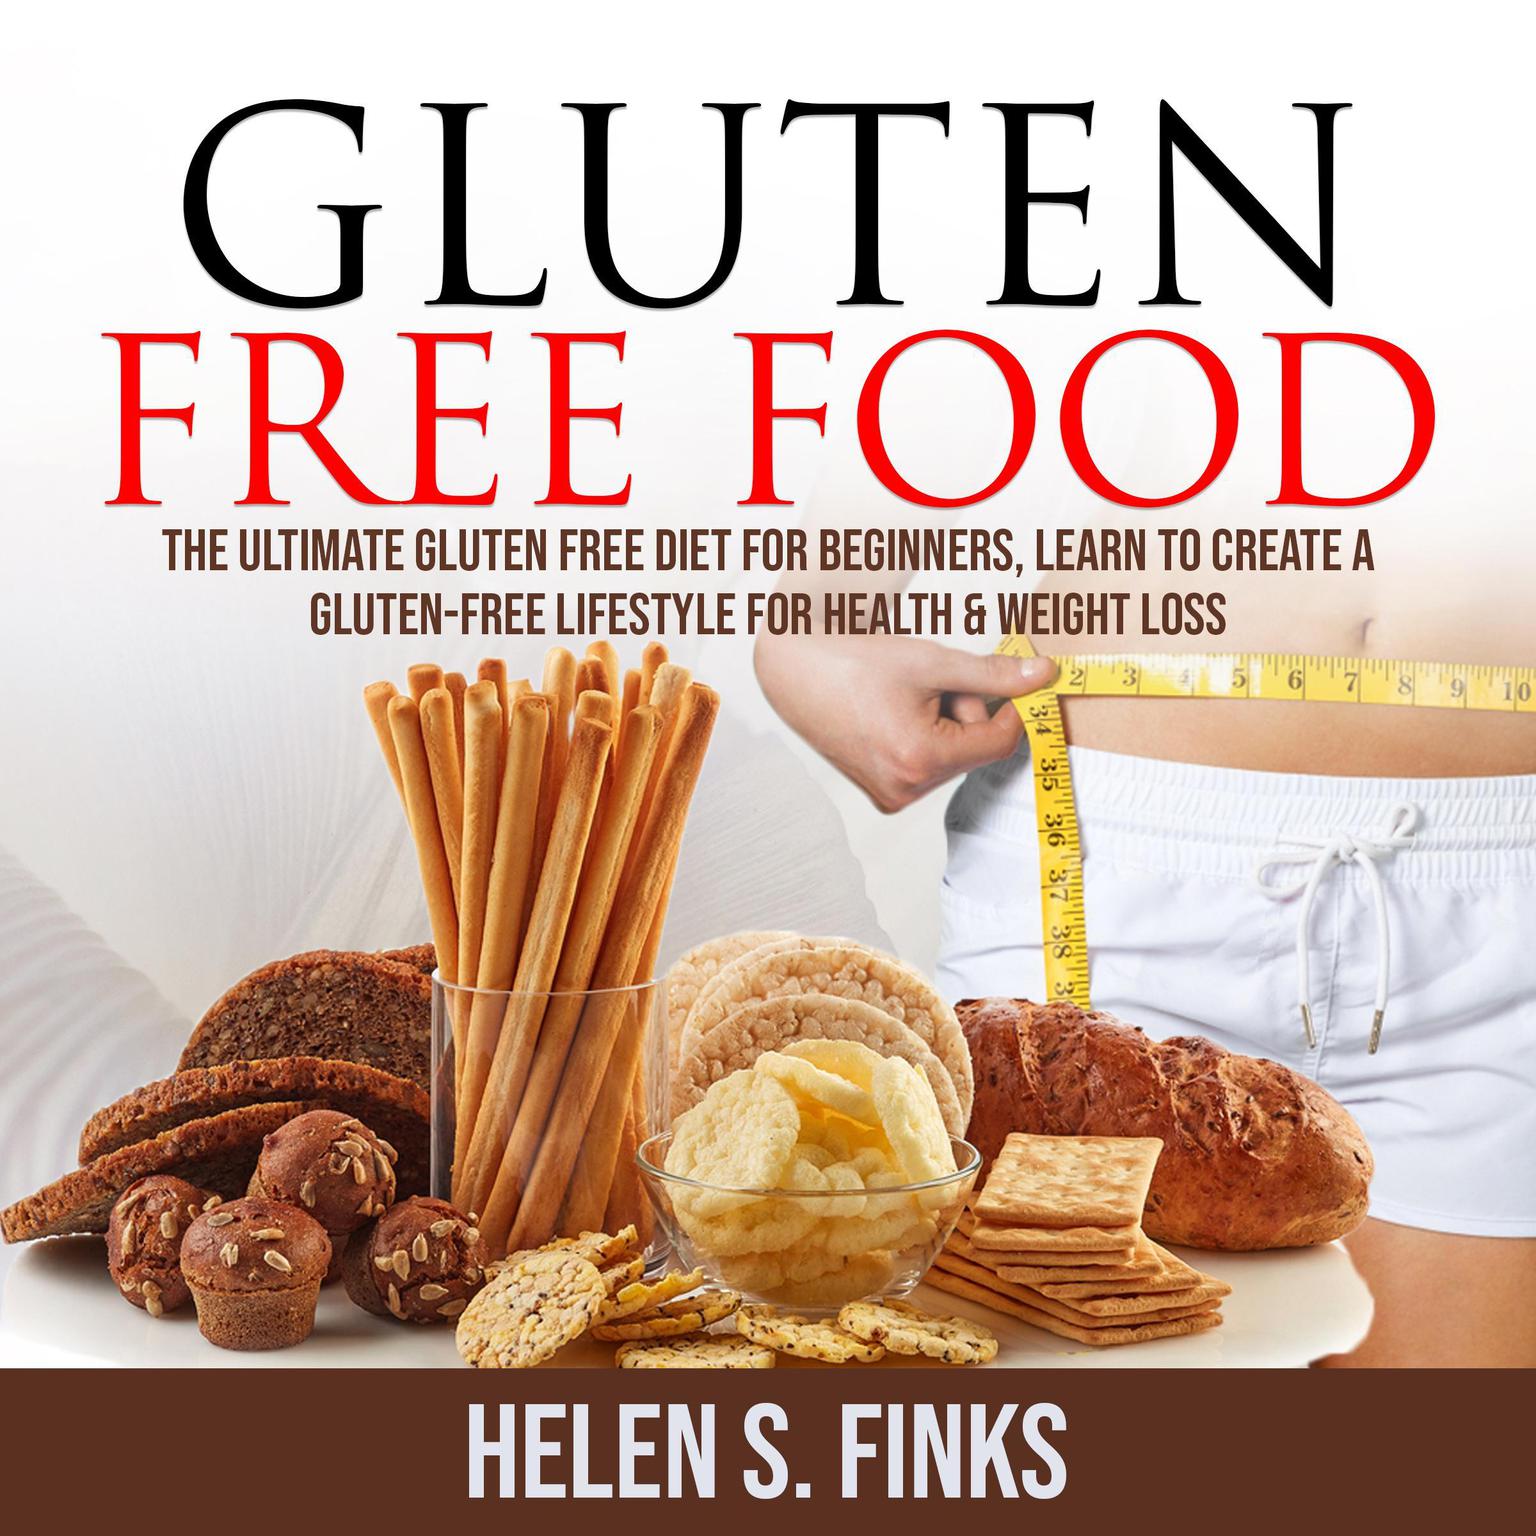 Gluten Free Food: The Ultimate Gluten Free Diet for Beginners, Learn to Create a Gluten-Free Lifestyle for Health & Weight Loss Audiobook, by Helen S. Finks